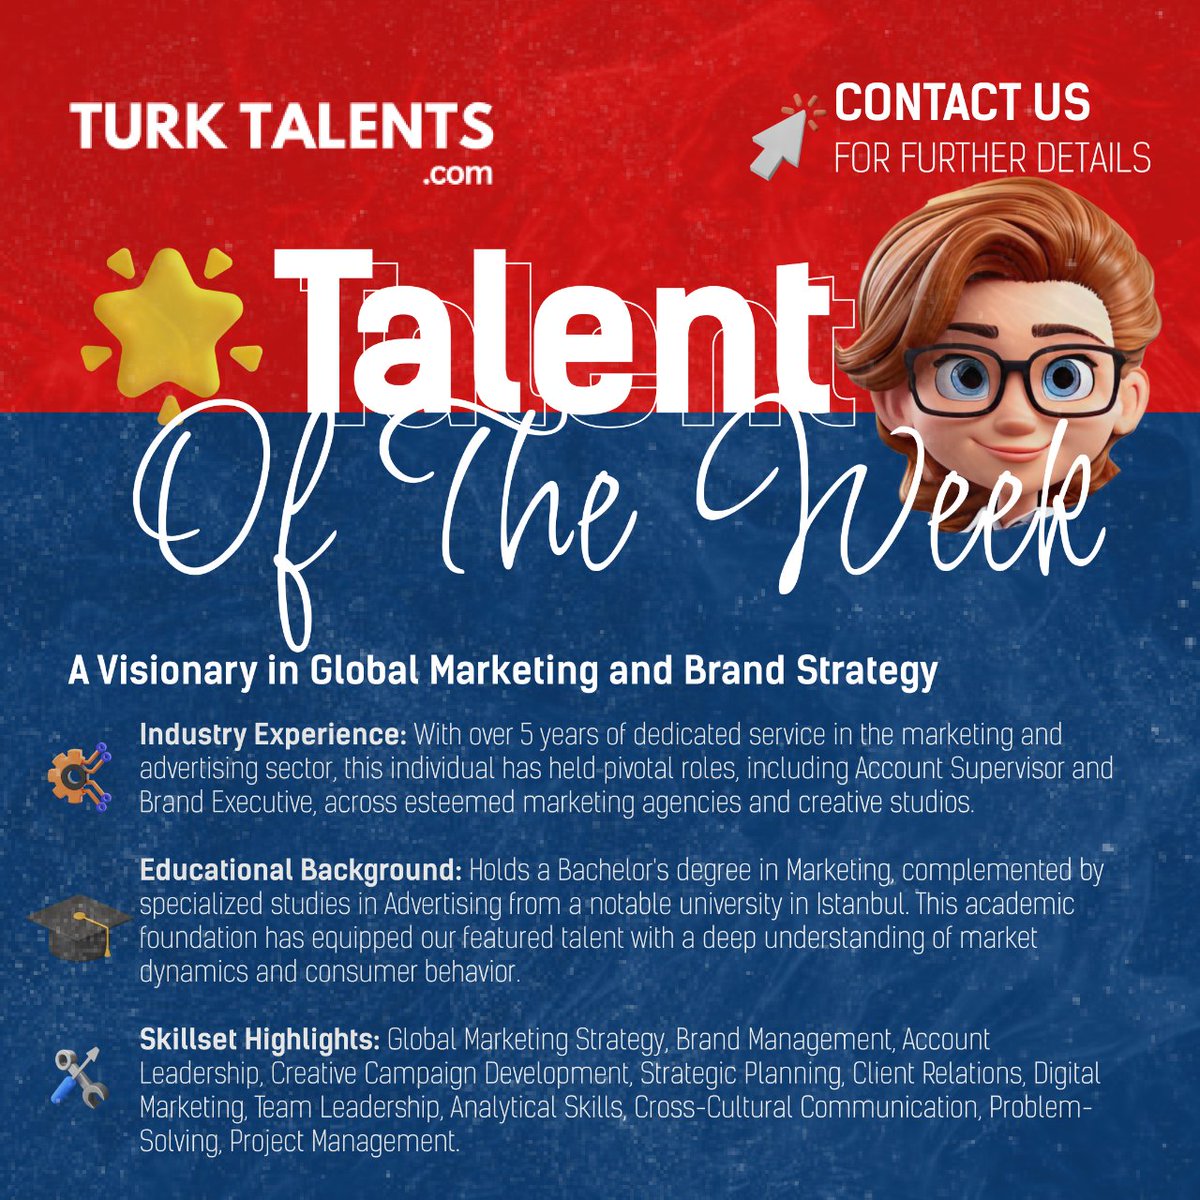 🌟 Meet our latest 'Talent of the Week' at TurkTalents.com! This marketing maven has a stellar track record of transforming brands with innovative strategies and creative campaigns. 

#TurkTalents #TalentOfTheWeek #MarketingExpert #BrandVisionary